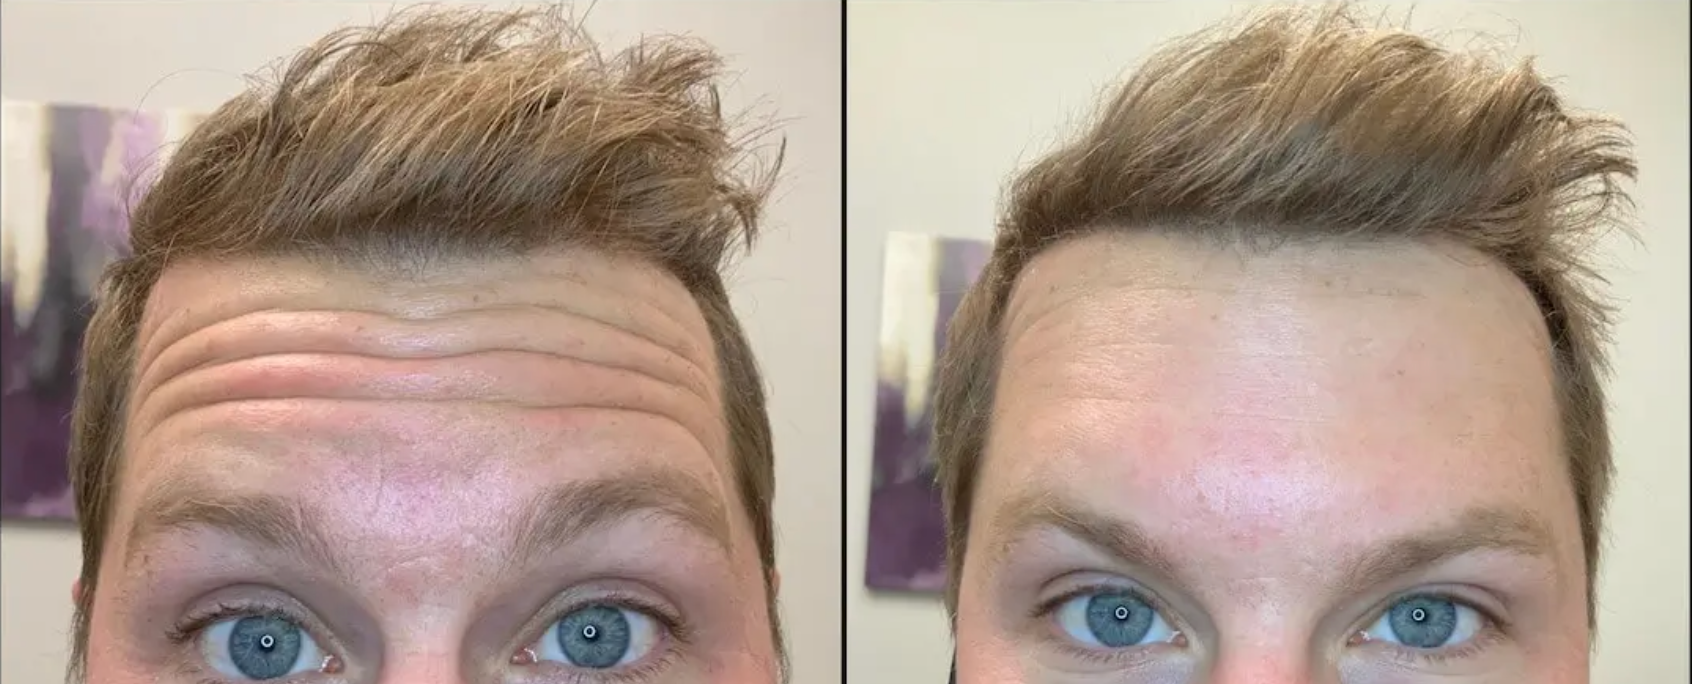 Real patient before and after cosmetic injectable skin treatment in the forehead and brow